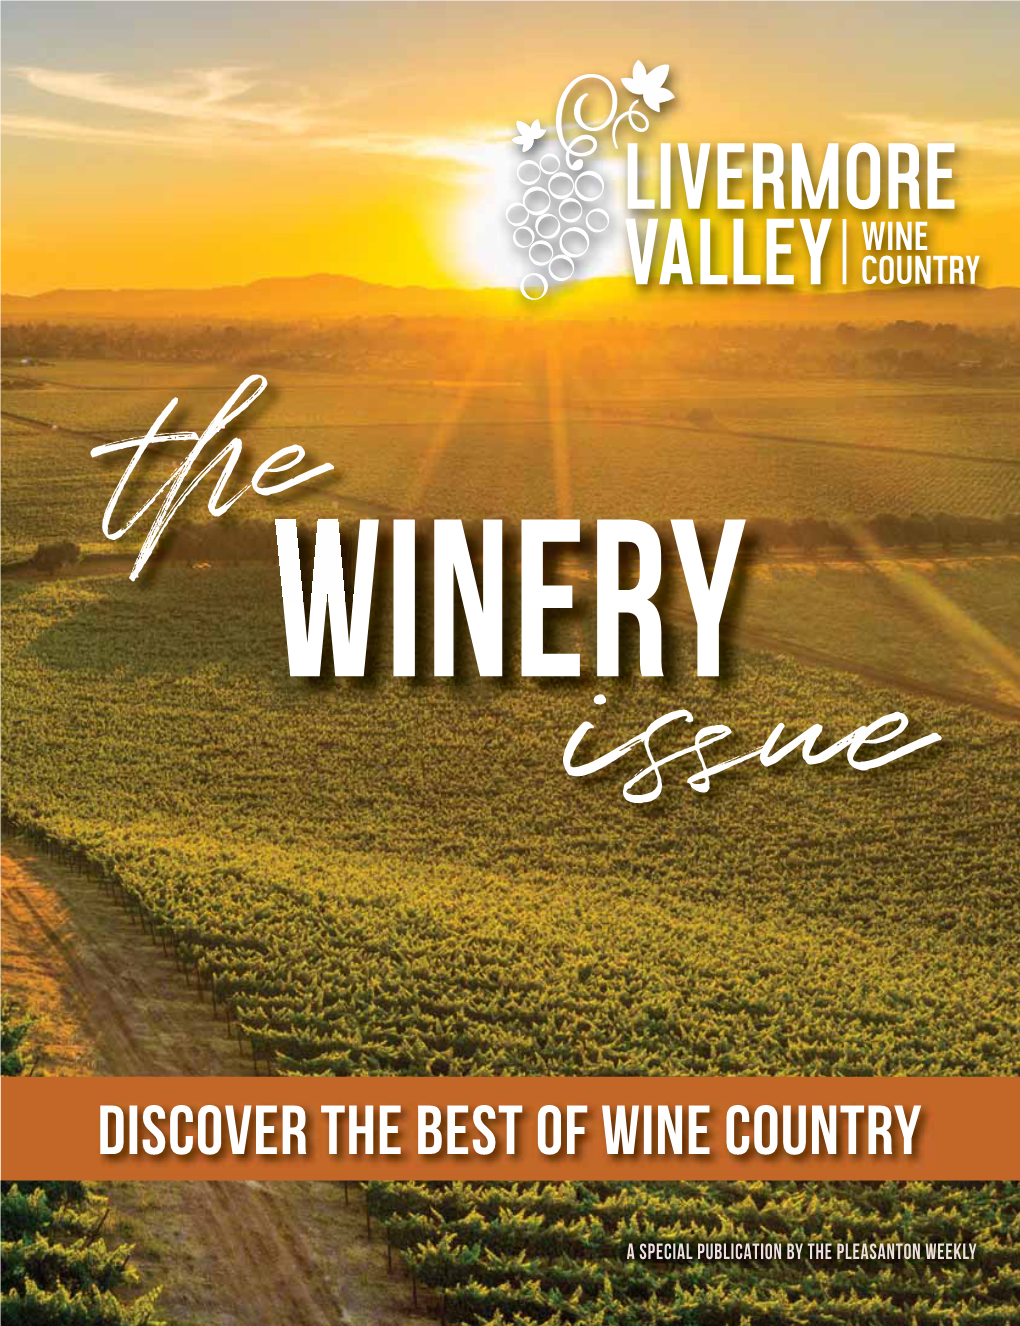 Discover the Best of Wine Country